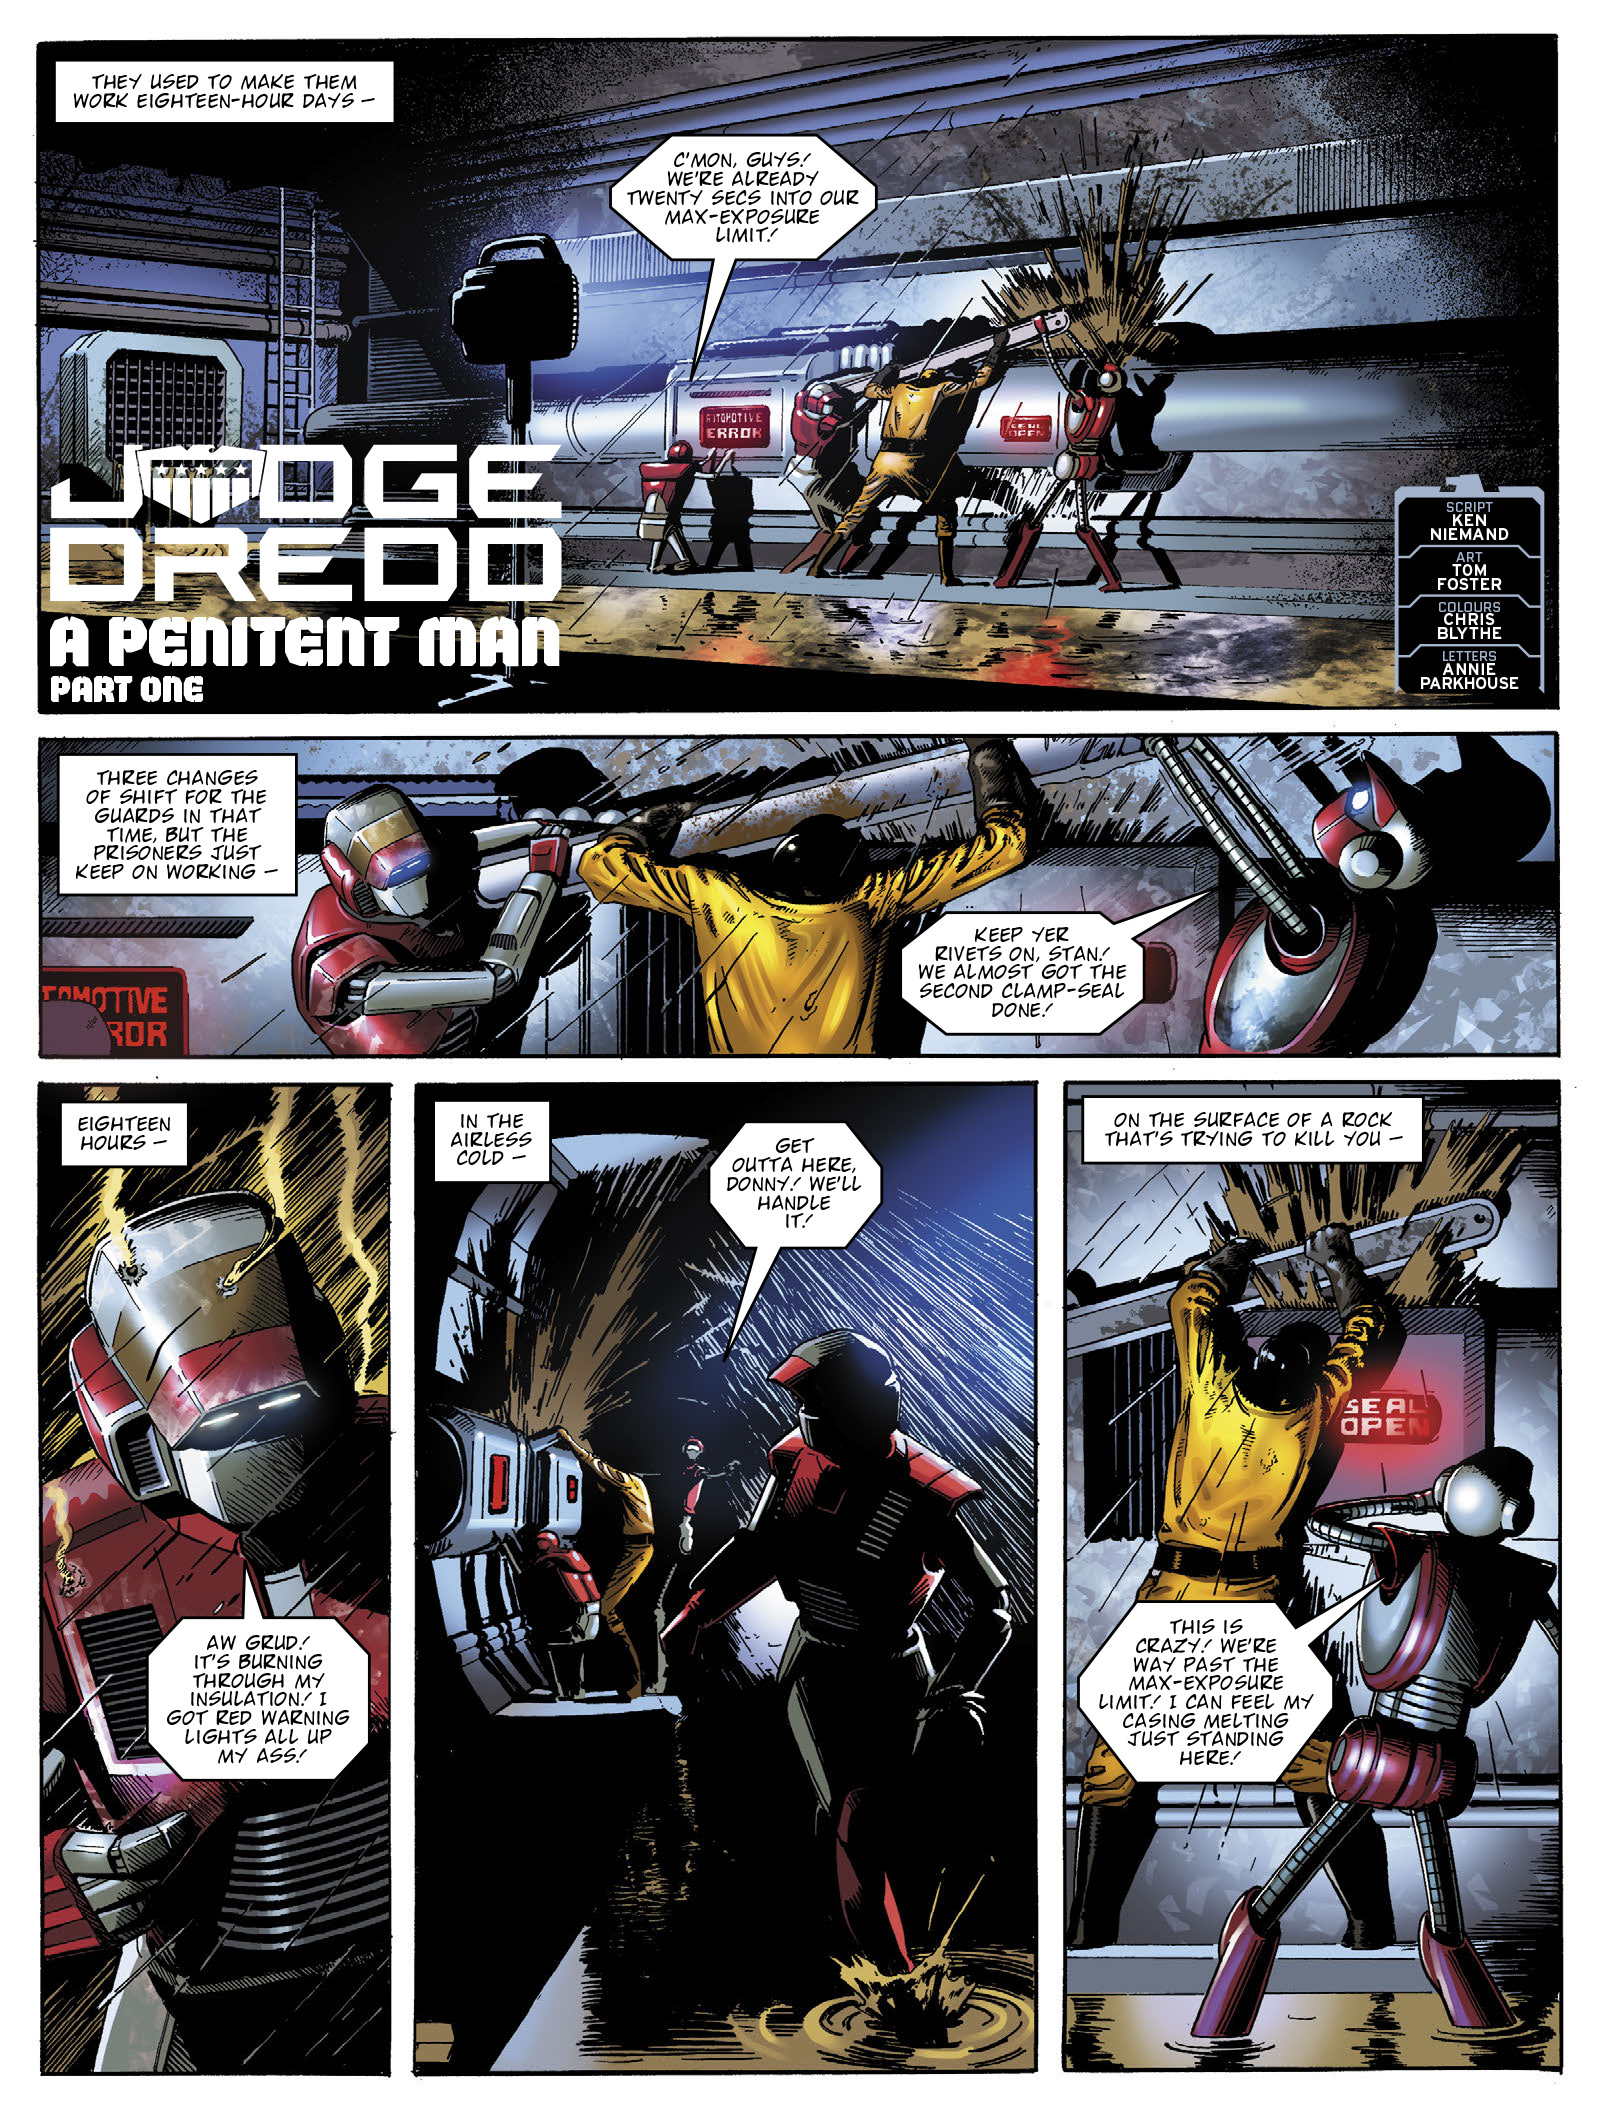 2000 AD: Chapter 2225 - Page 3